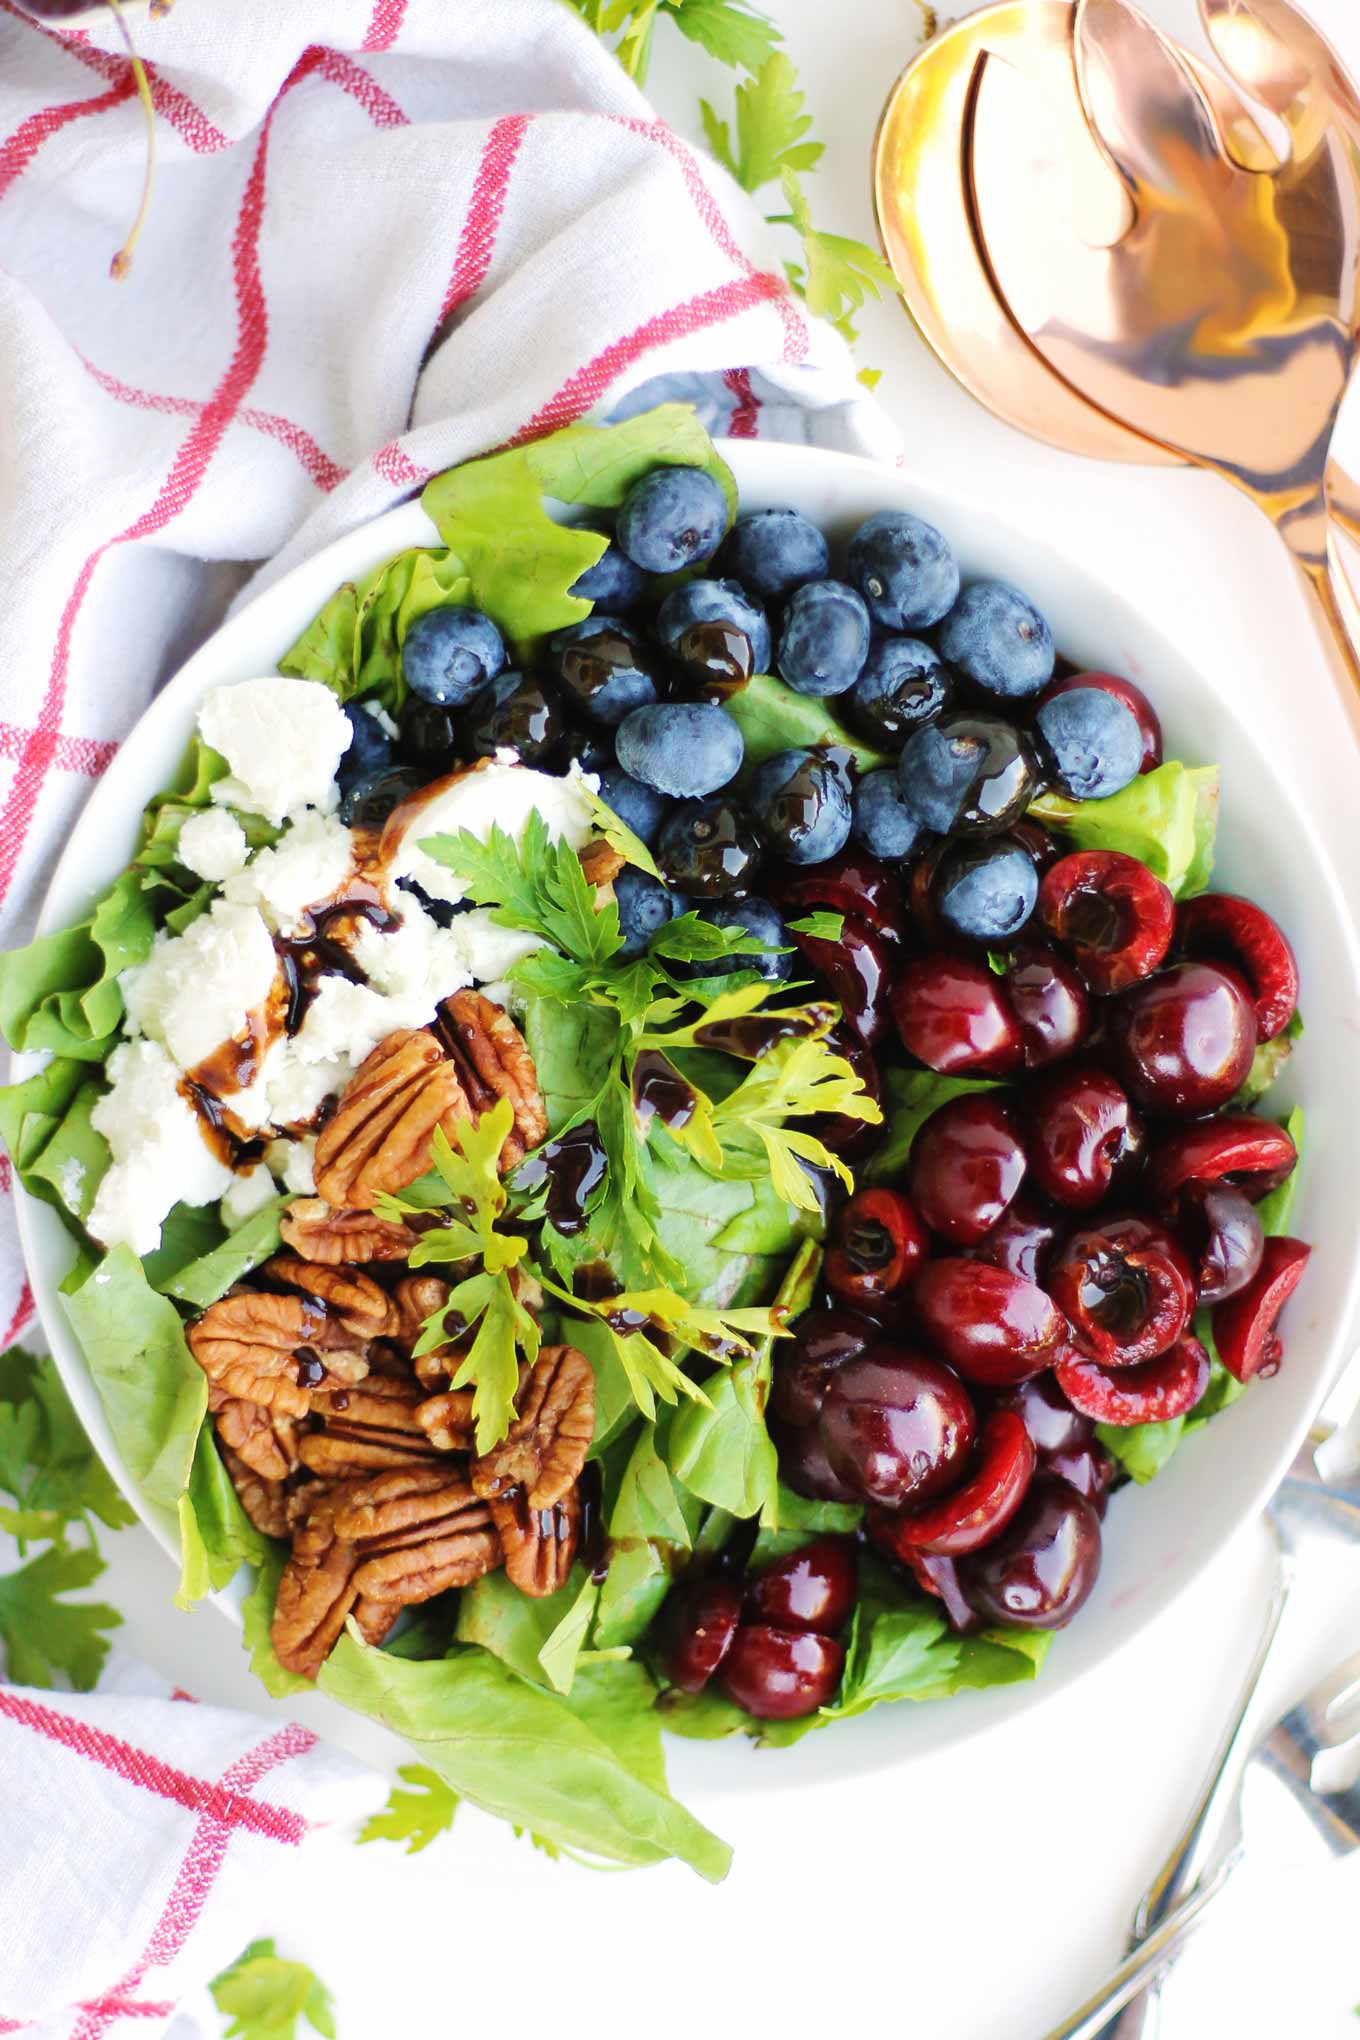 Cherry blueberry salad with pecans and goat cheese with a red and white towel